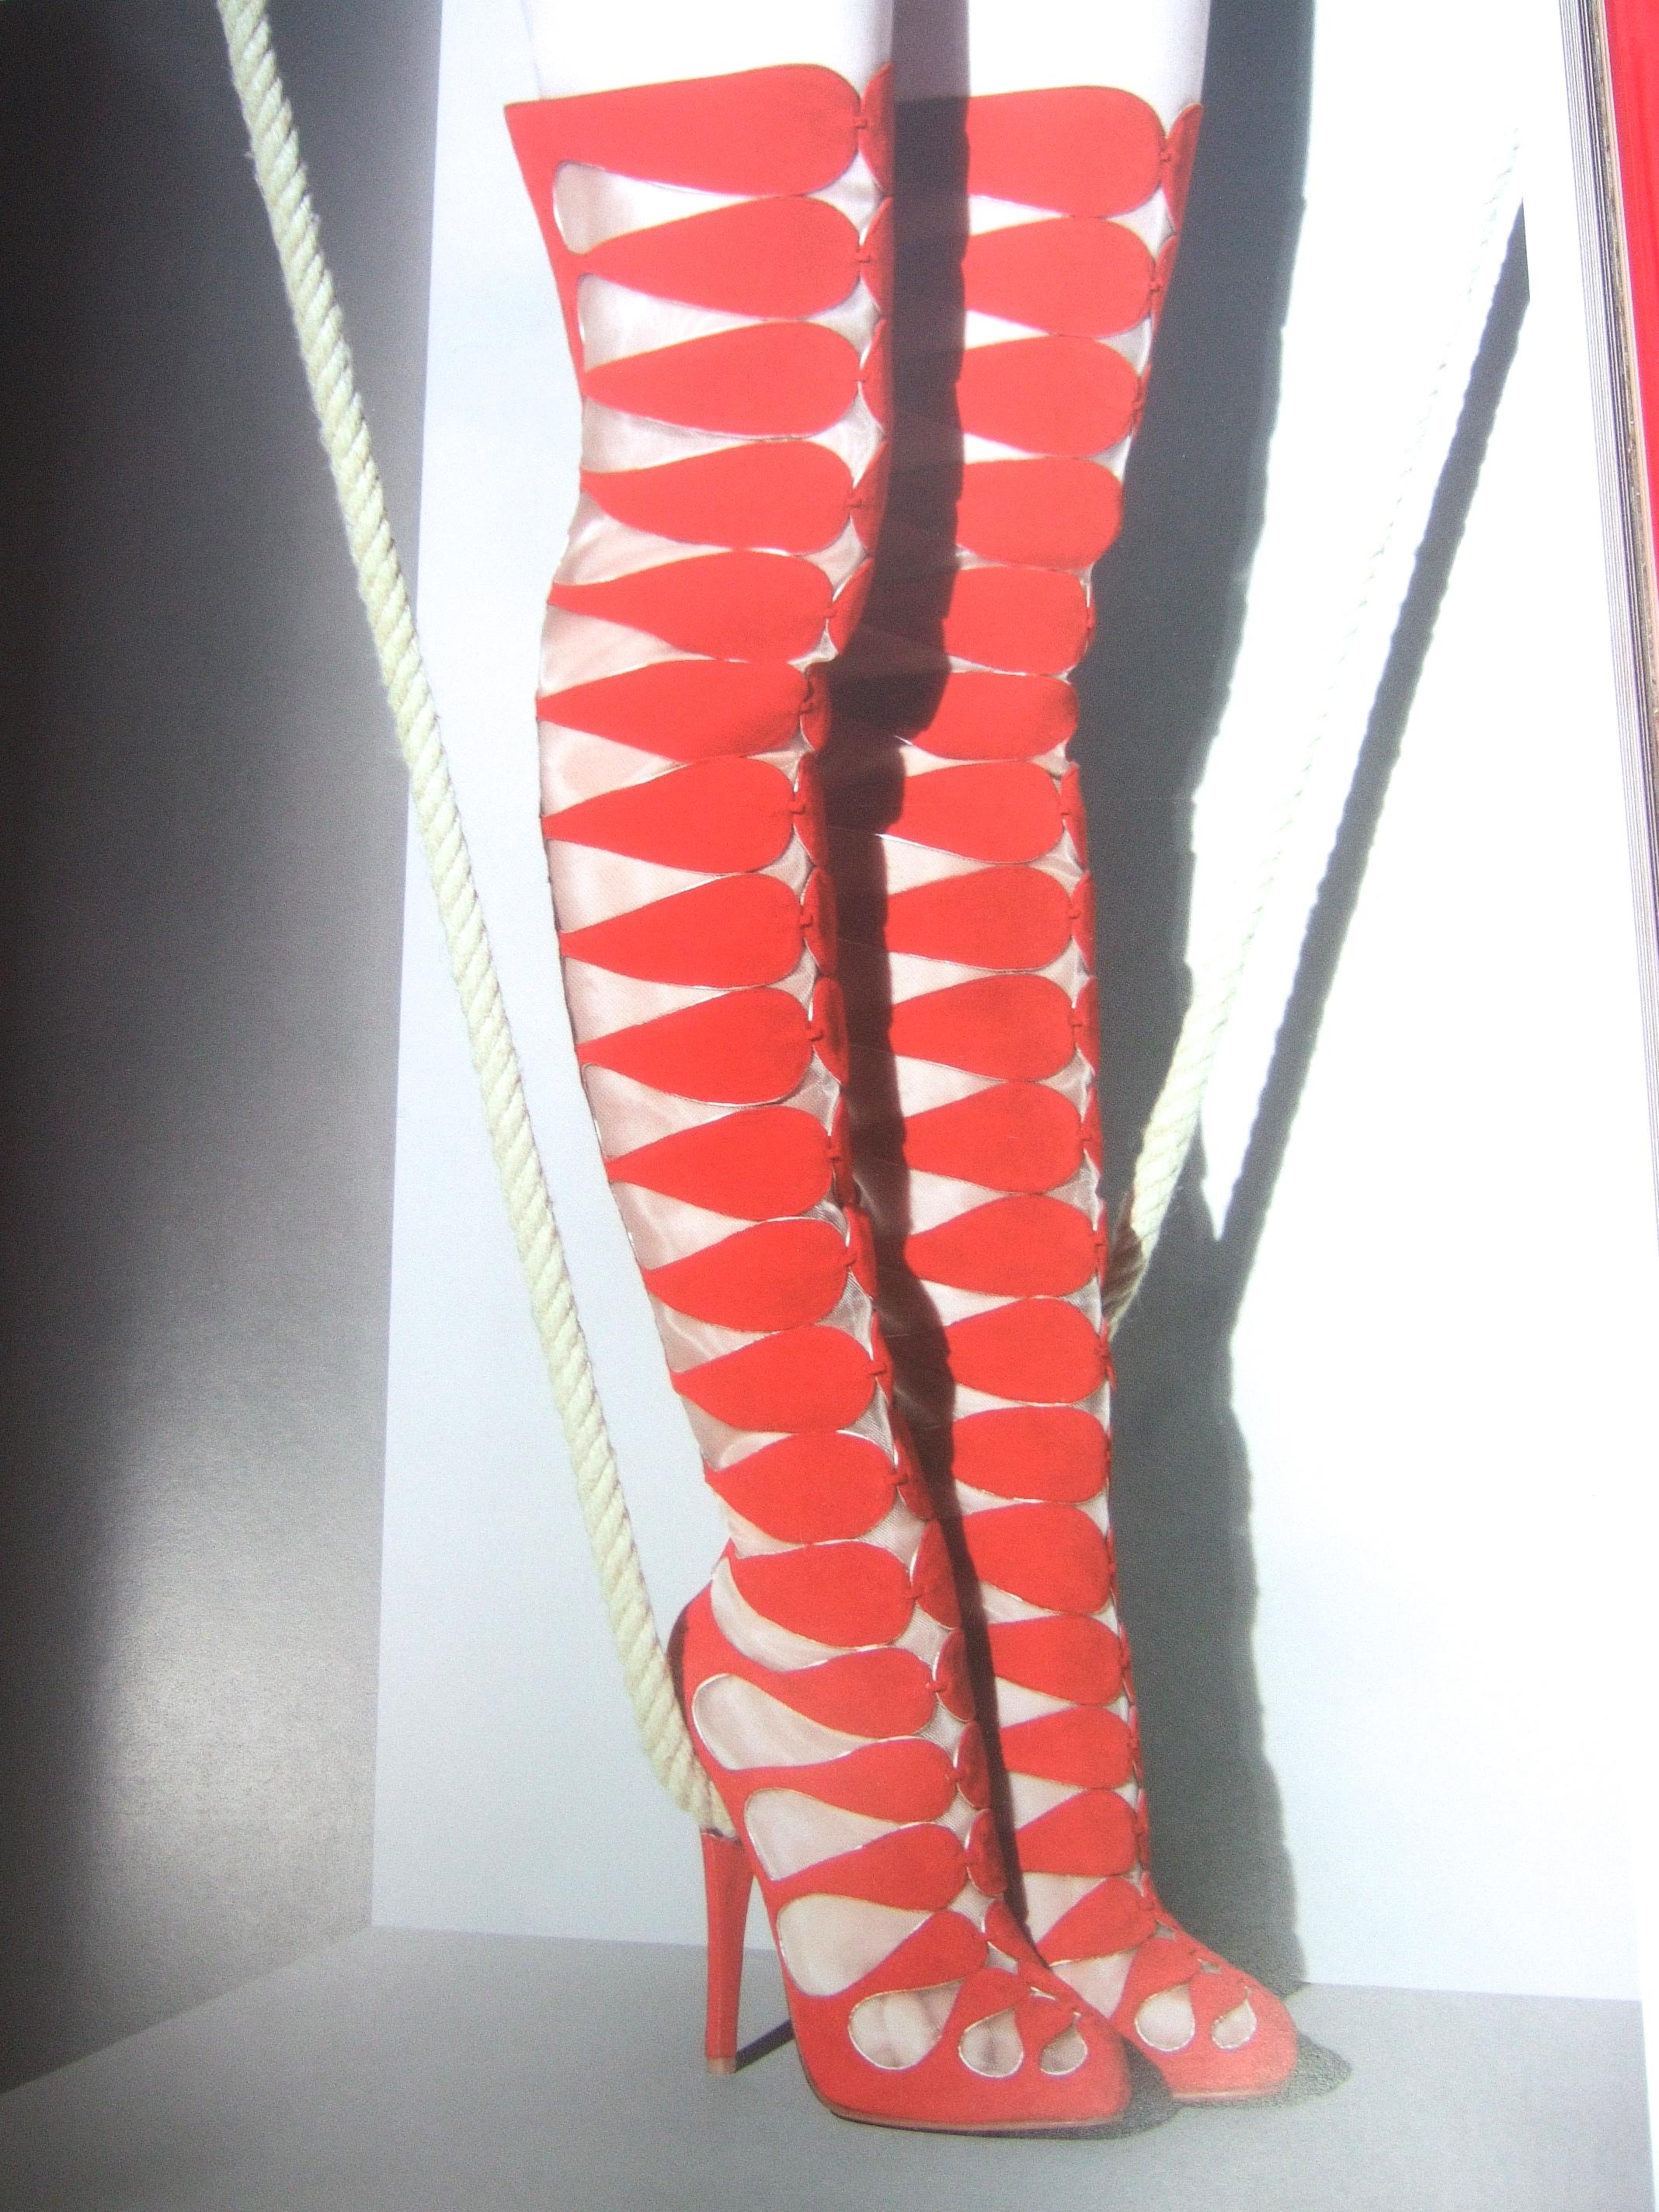 Christian Louboutin 1st Edition hardcover Rizzoli book c 2011
The hardcover book is an archive of Louboutin's exquisite shoe designs
There is a forward from actor John Malkovich

The book documents his early life and career. Features an array of his